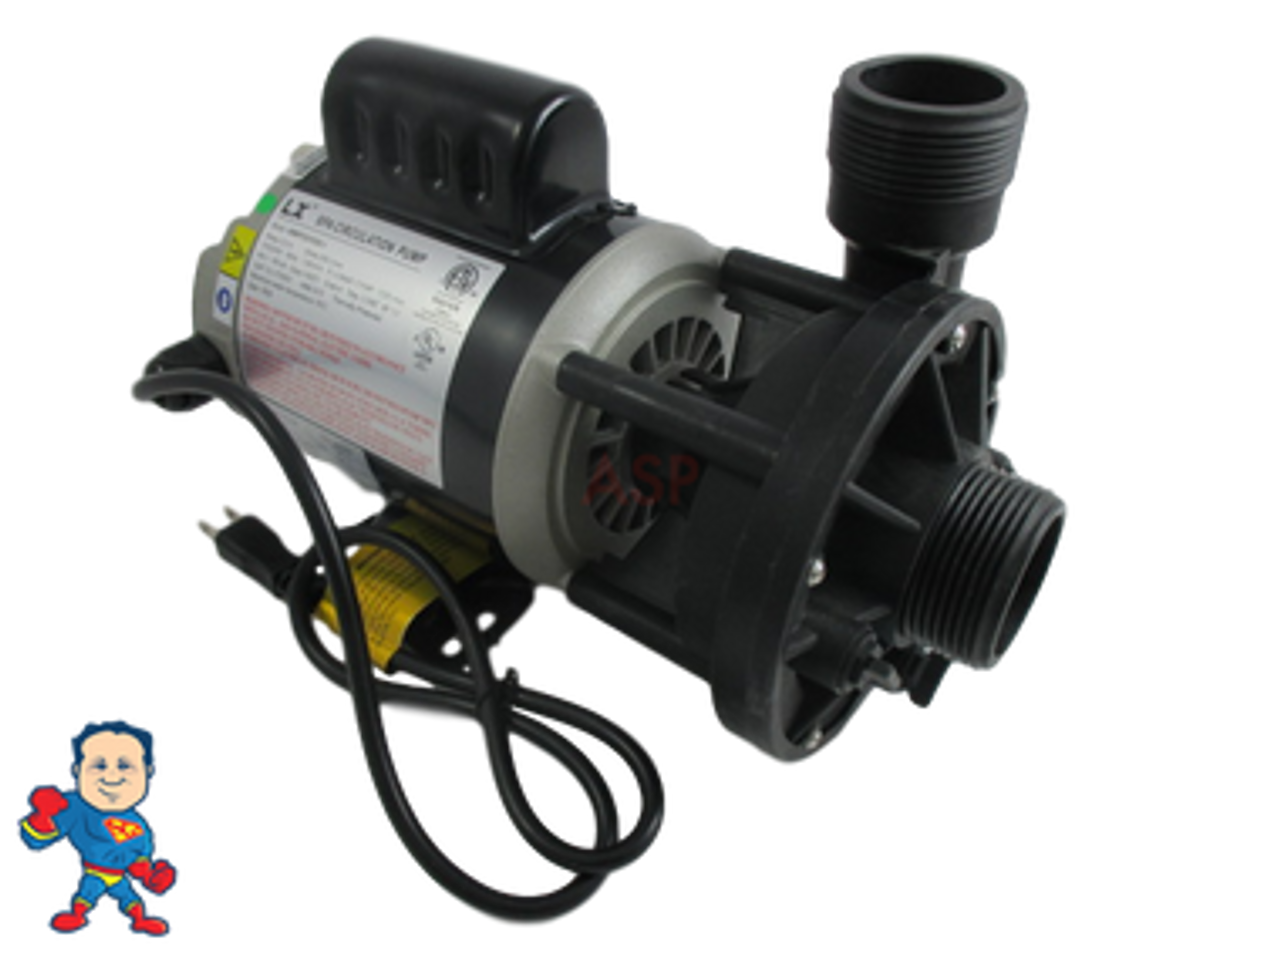 Circulation Pump, LX 48WTC, 1/8HP, 115 or 230V, 1.6 or 0.8A, 1-1/2"MBT, Side Discharge